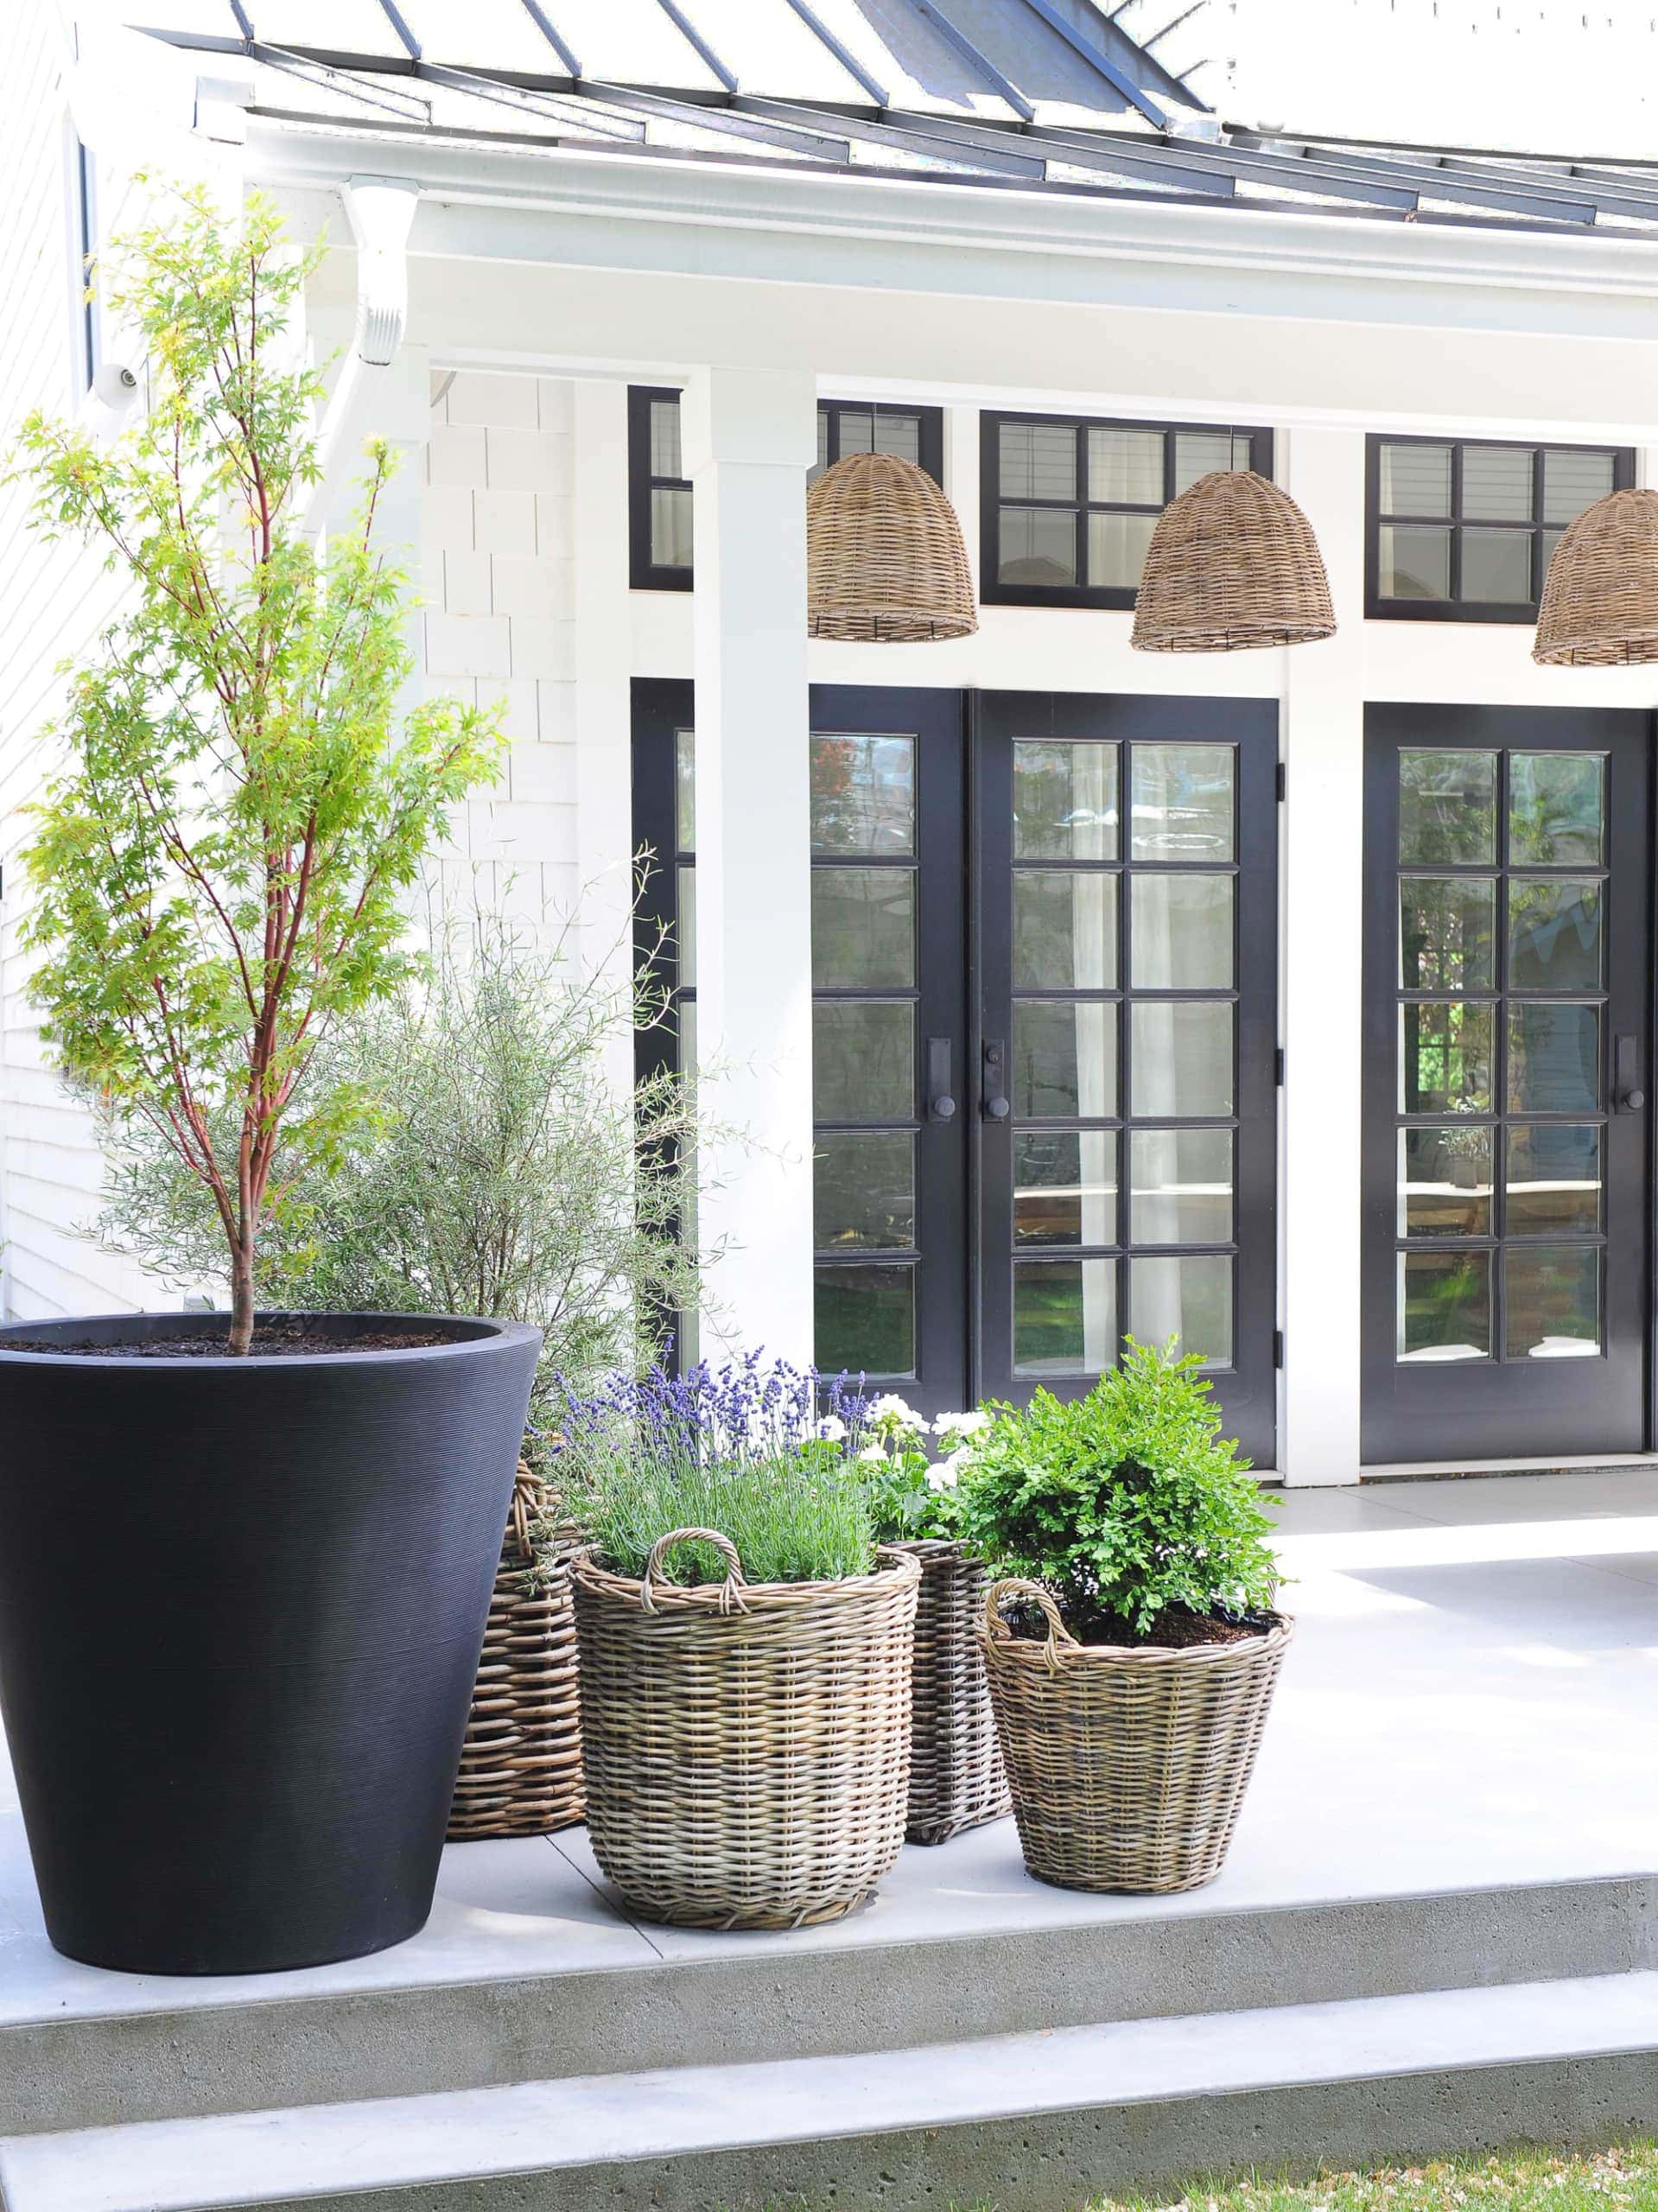 Pots for greenery on a back porch